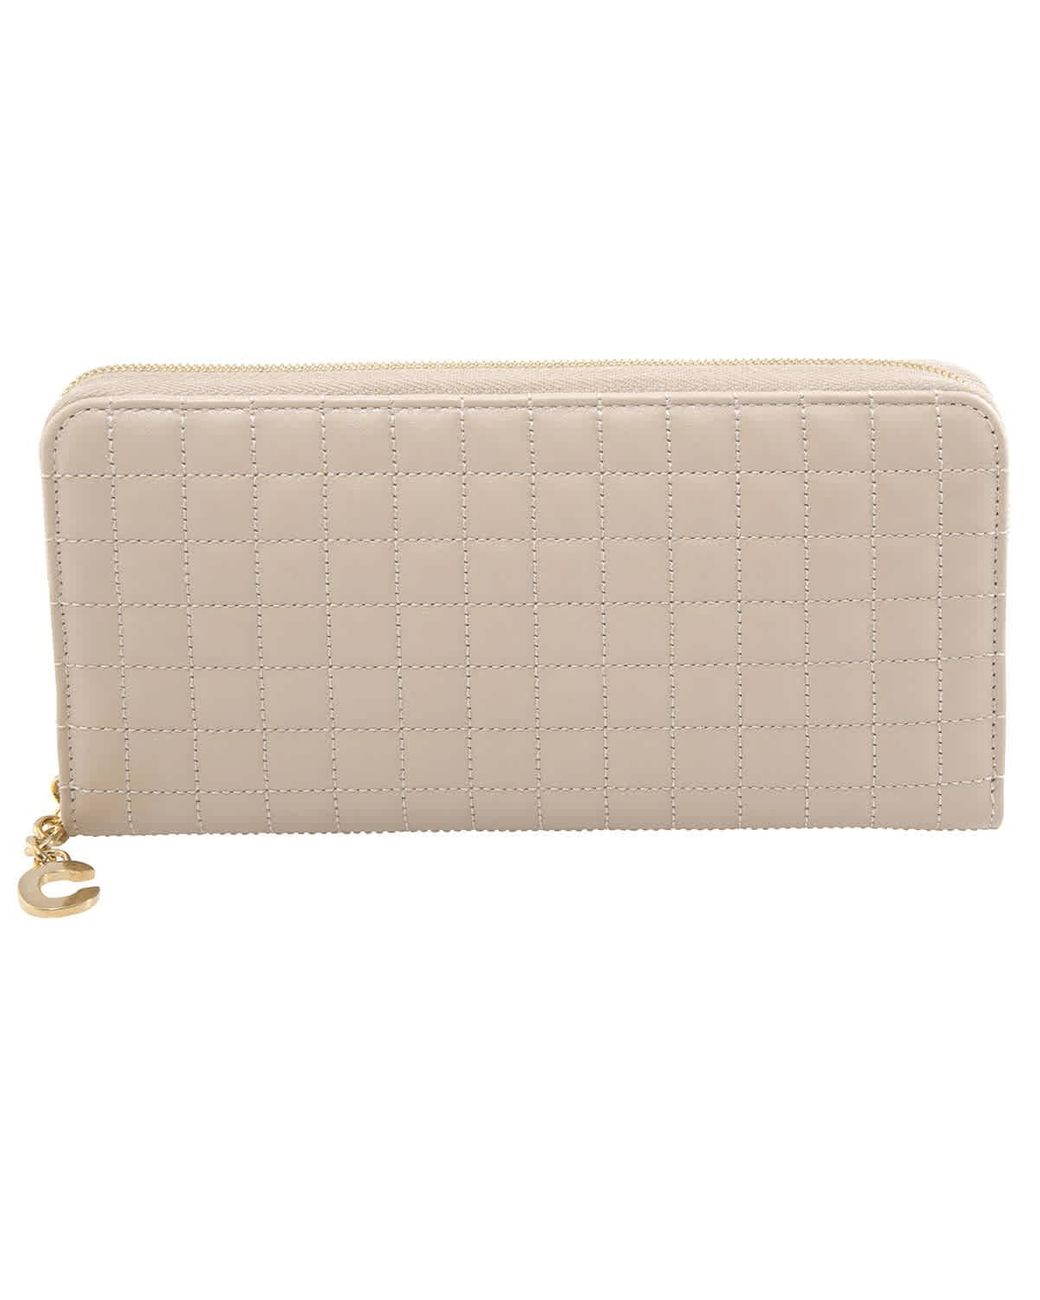 Celine Compact Zipped Wallet in Smooth Calfskin